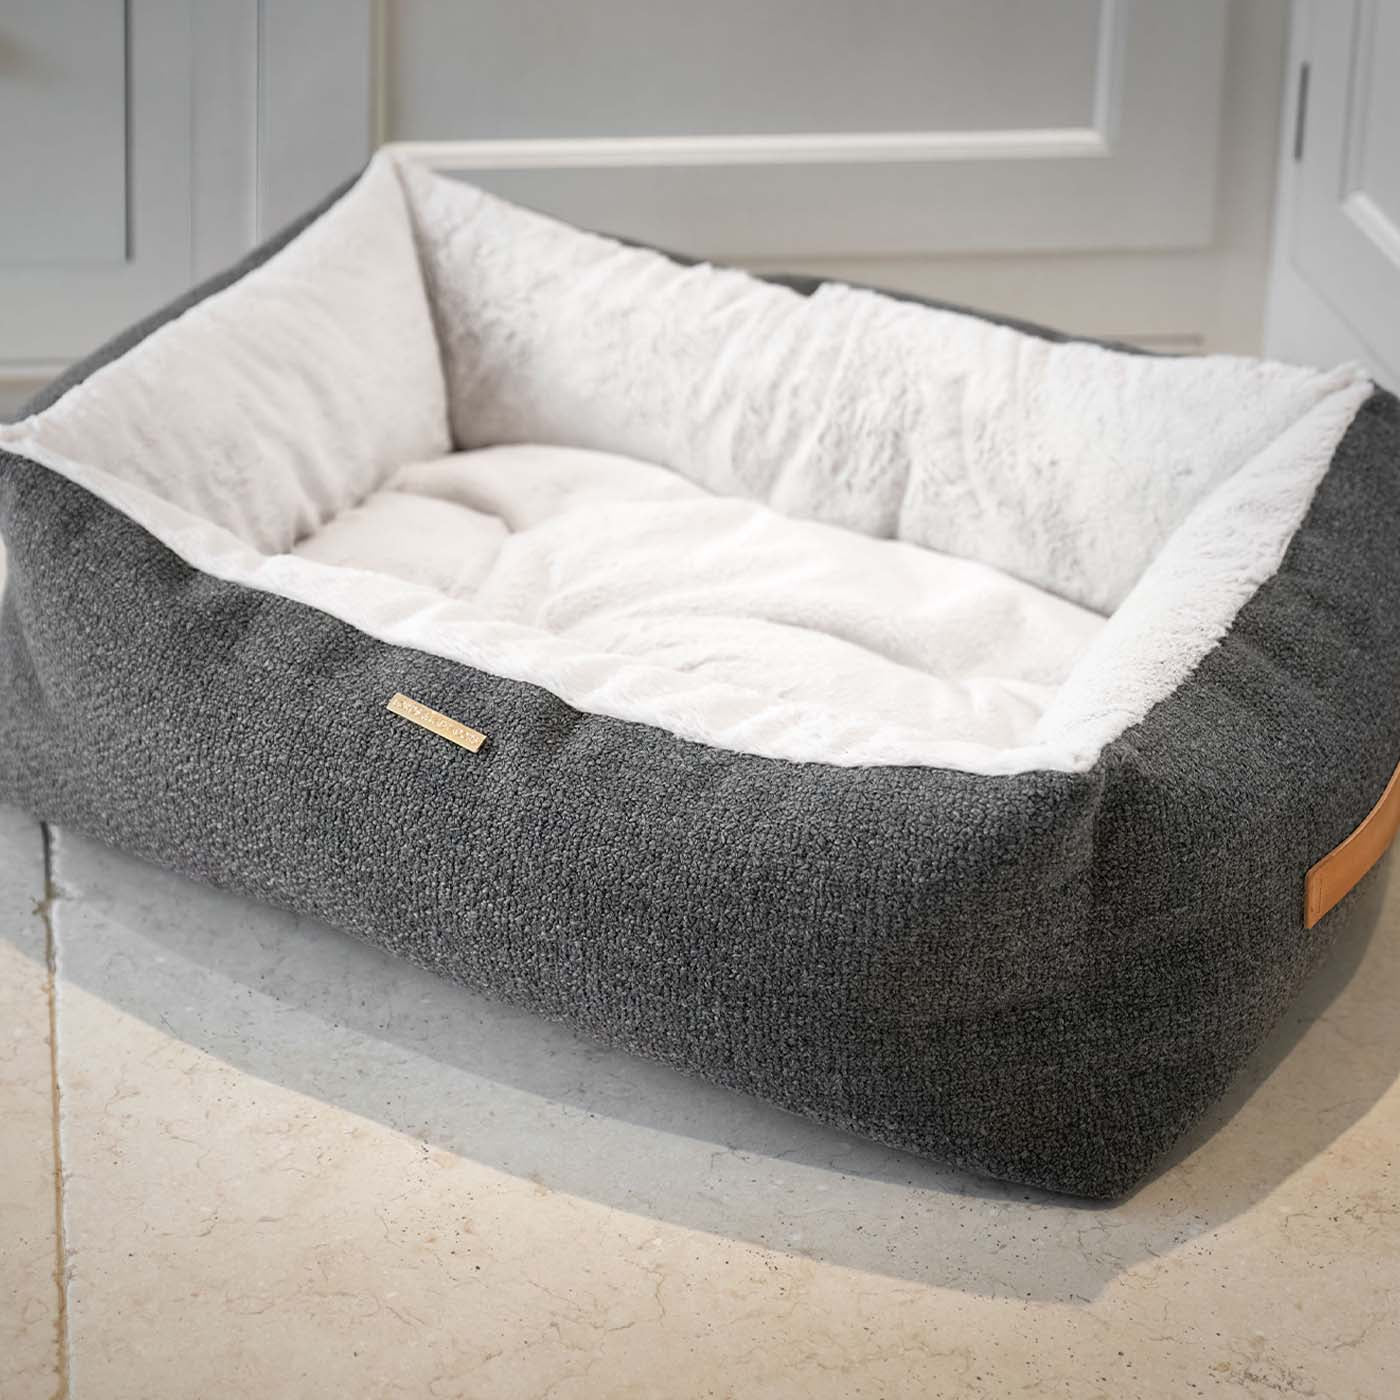 Present your furry friend with our luxuriously thick, plush Essentials Herdwick Box Bed in Graphite. Featuring a reversible inner cushion, along with Convenient carry handles on either side. This is a hardwearing woven fabric handmade in Italy for the perfect high-quality. now available at Lords and Labradors US